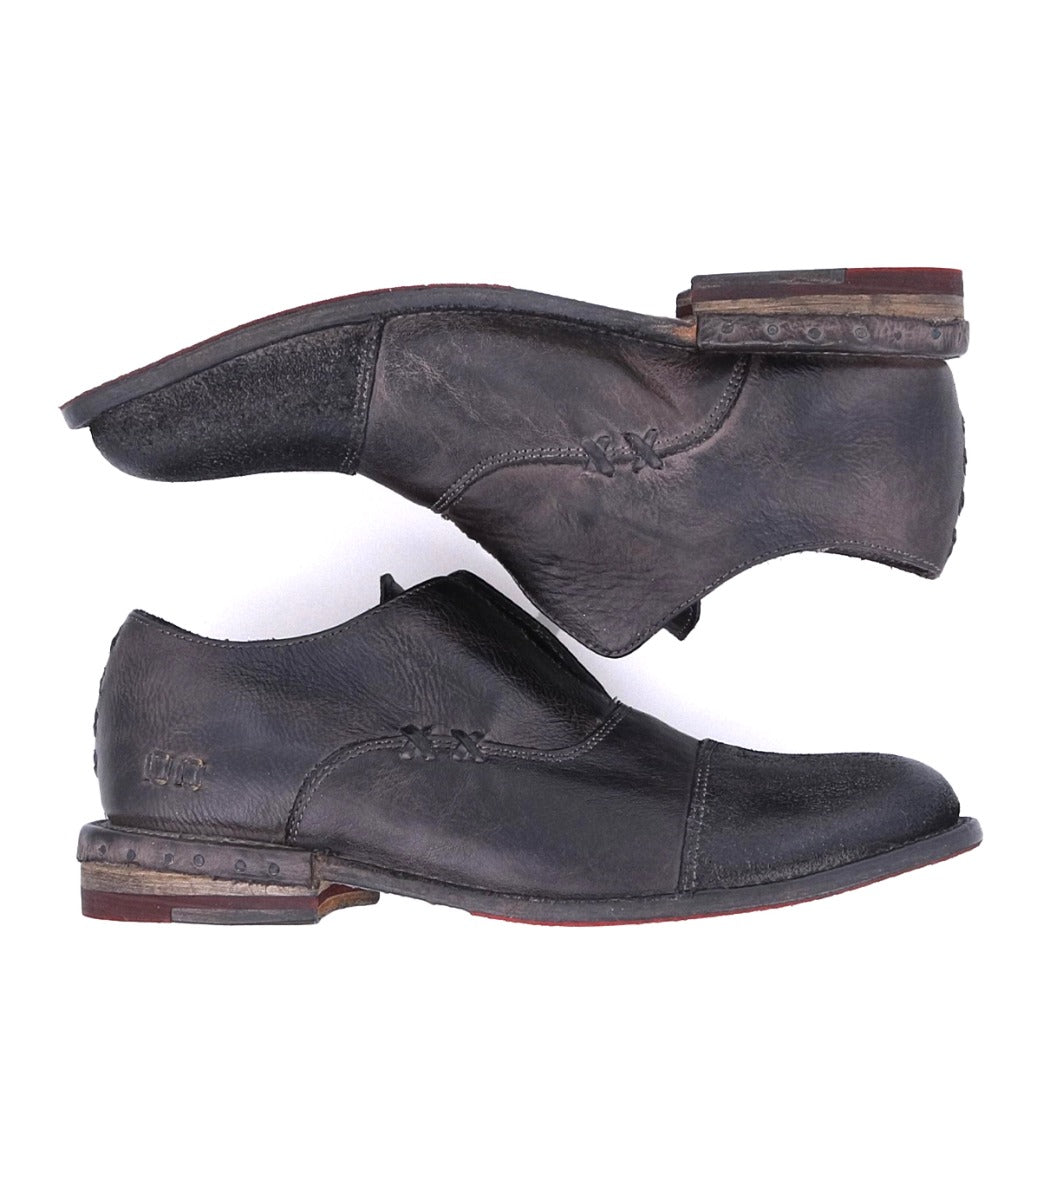 A pair of Bed Stu Rose men's black leather shoes on a white background.